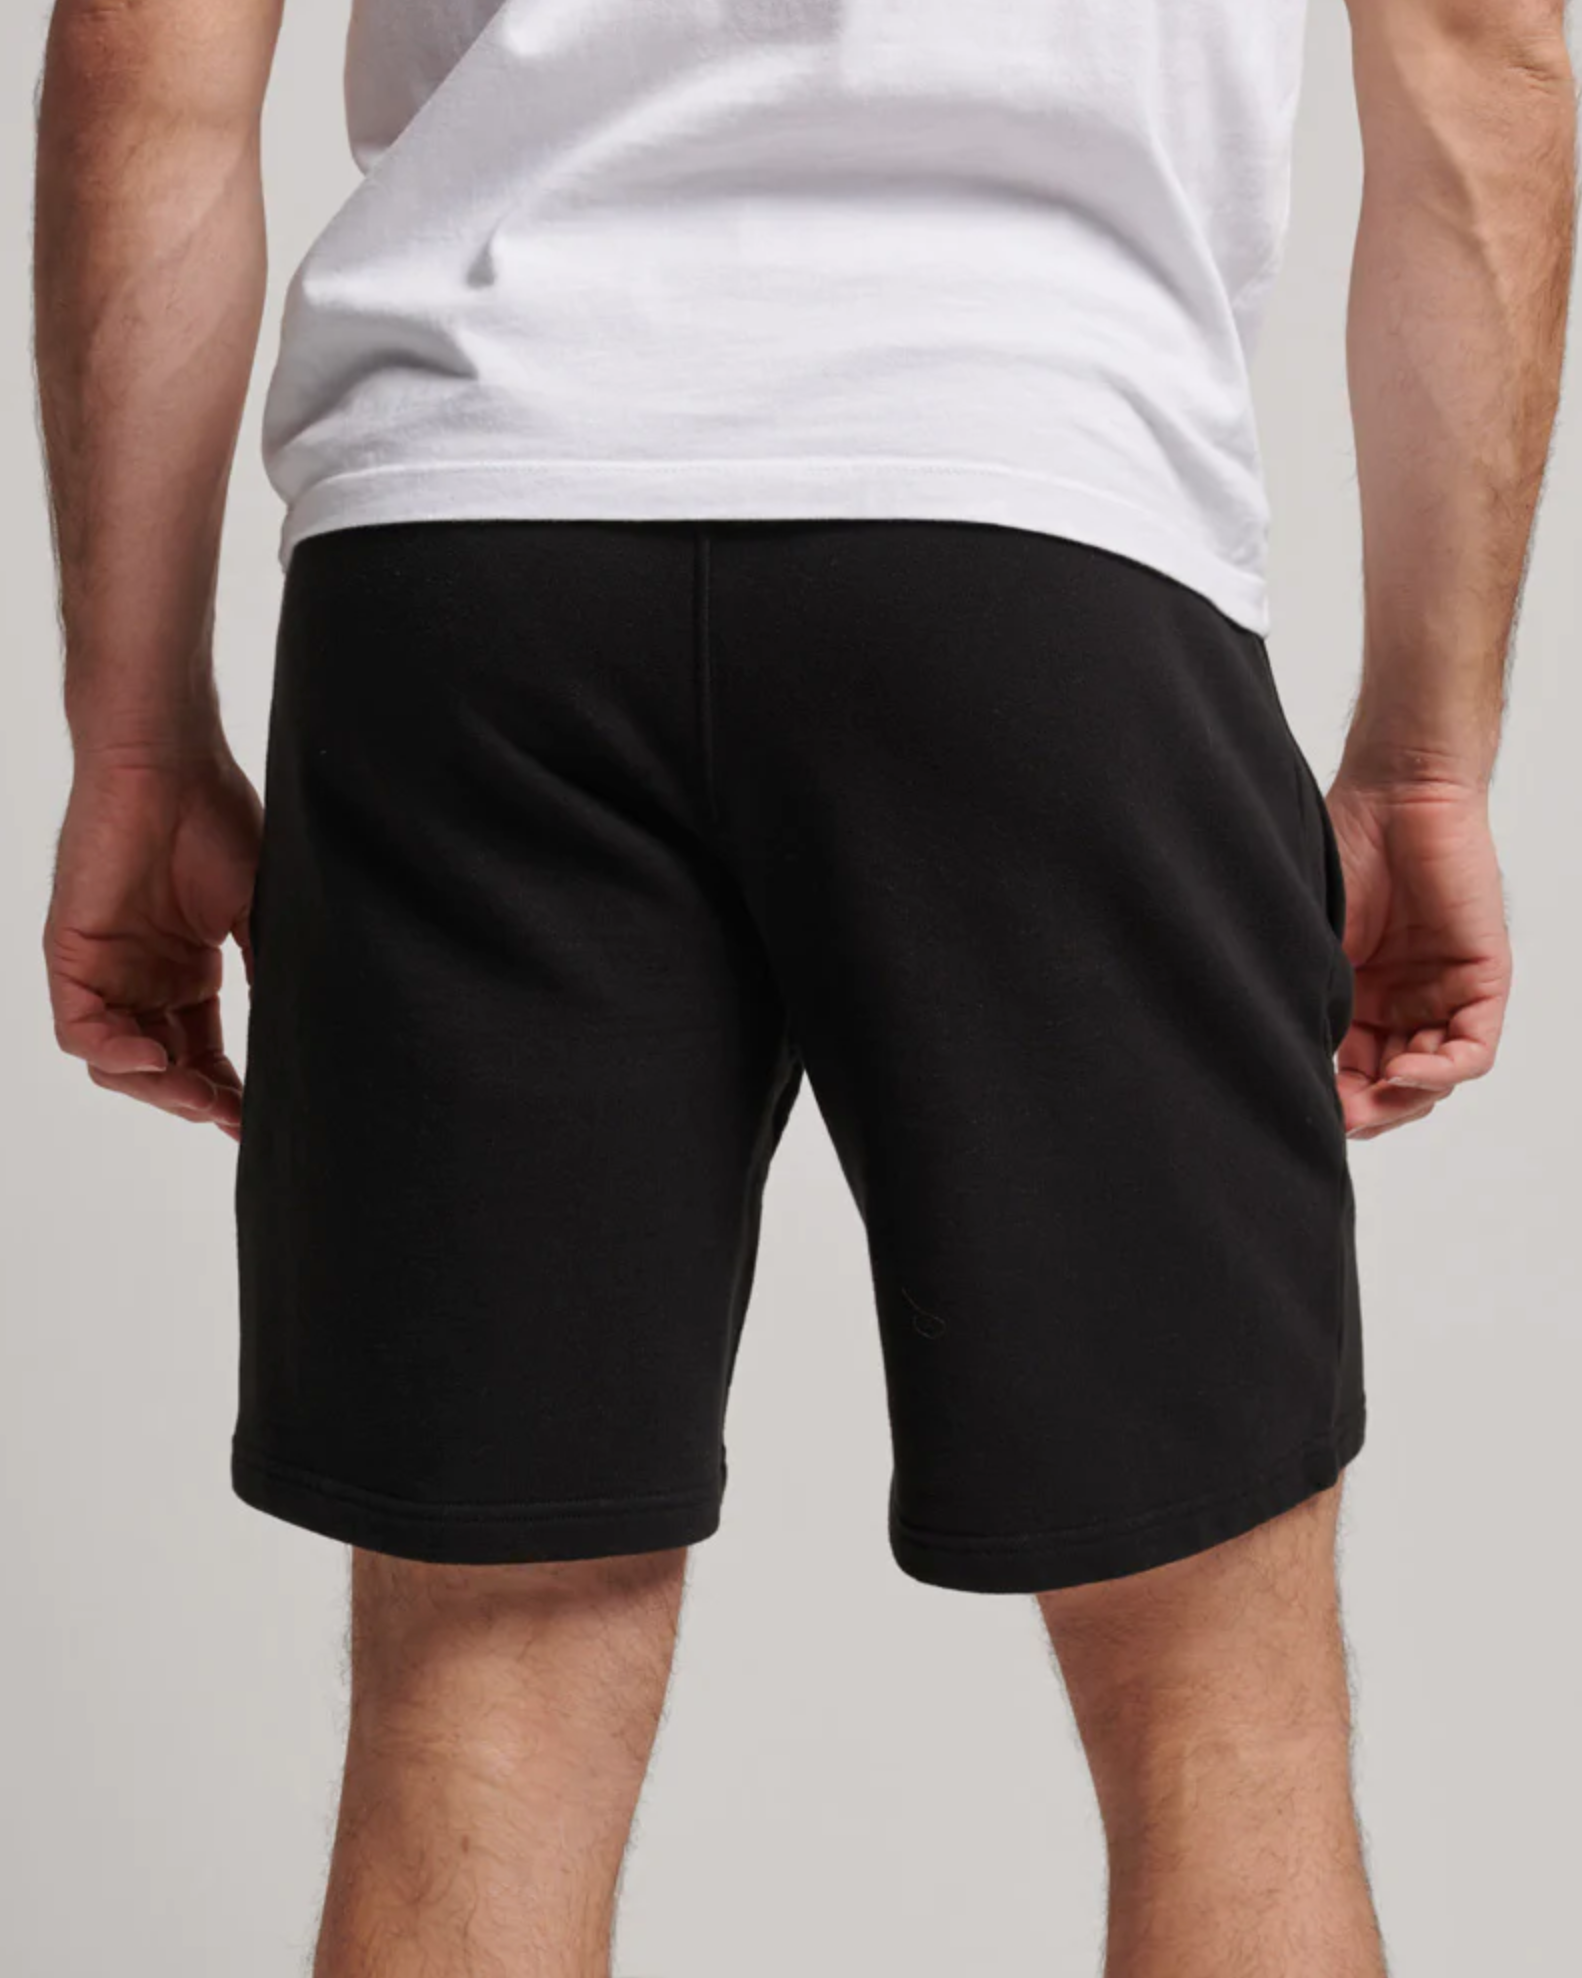 Superdry Code Core Sports Shorts - Black